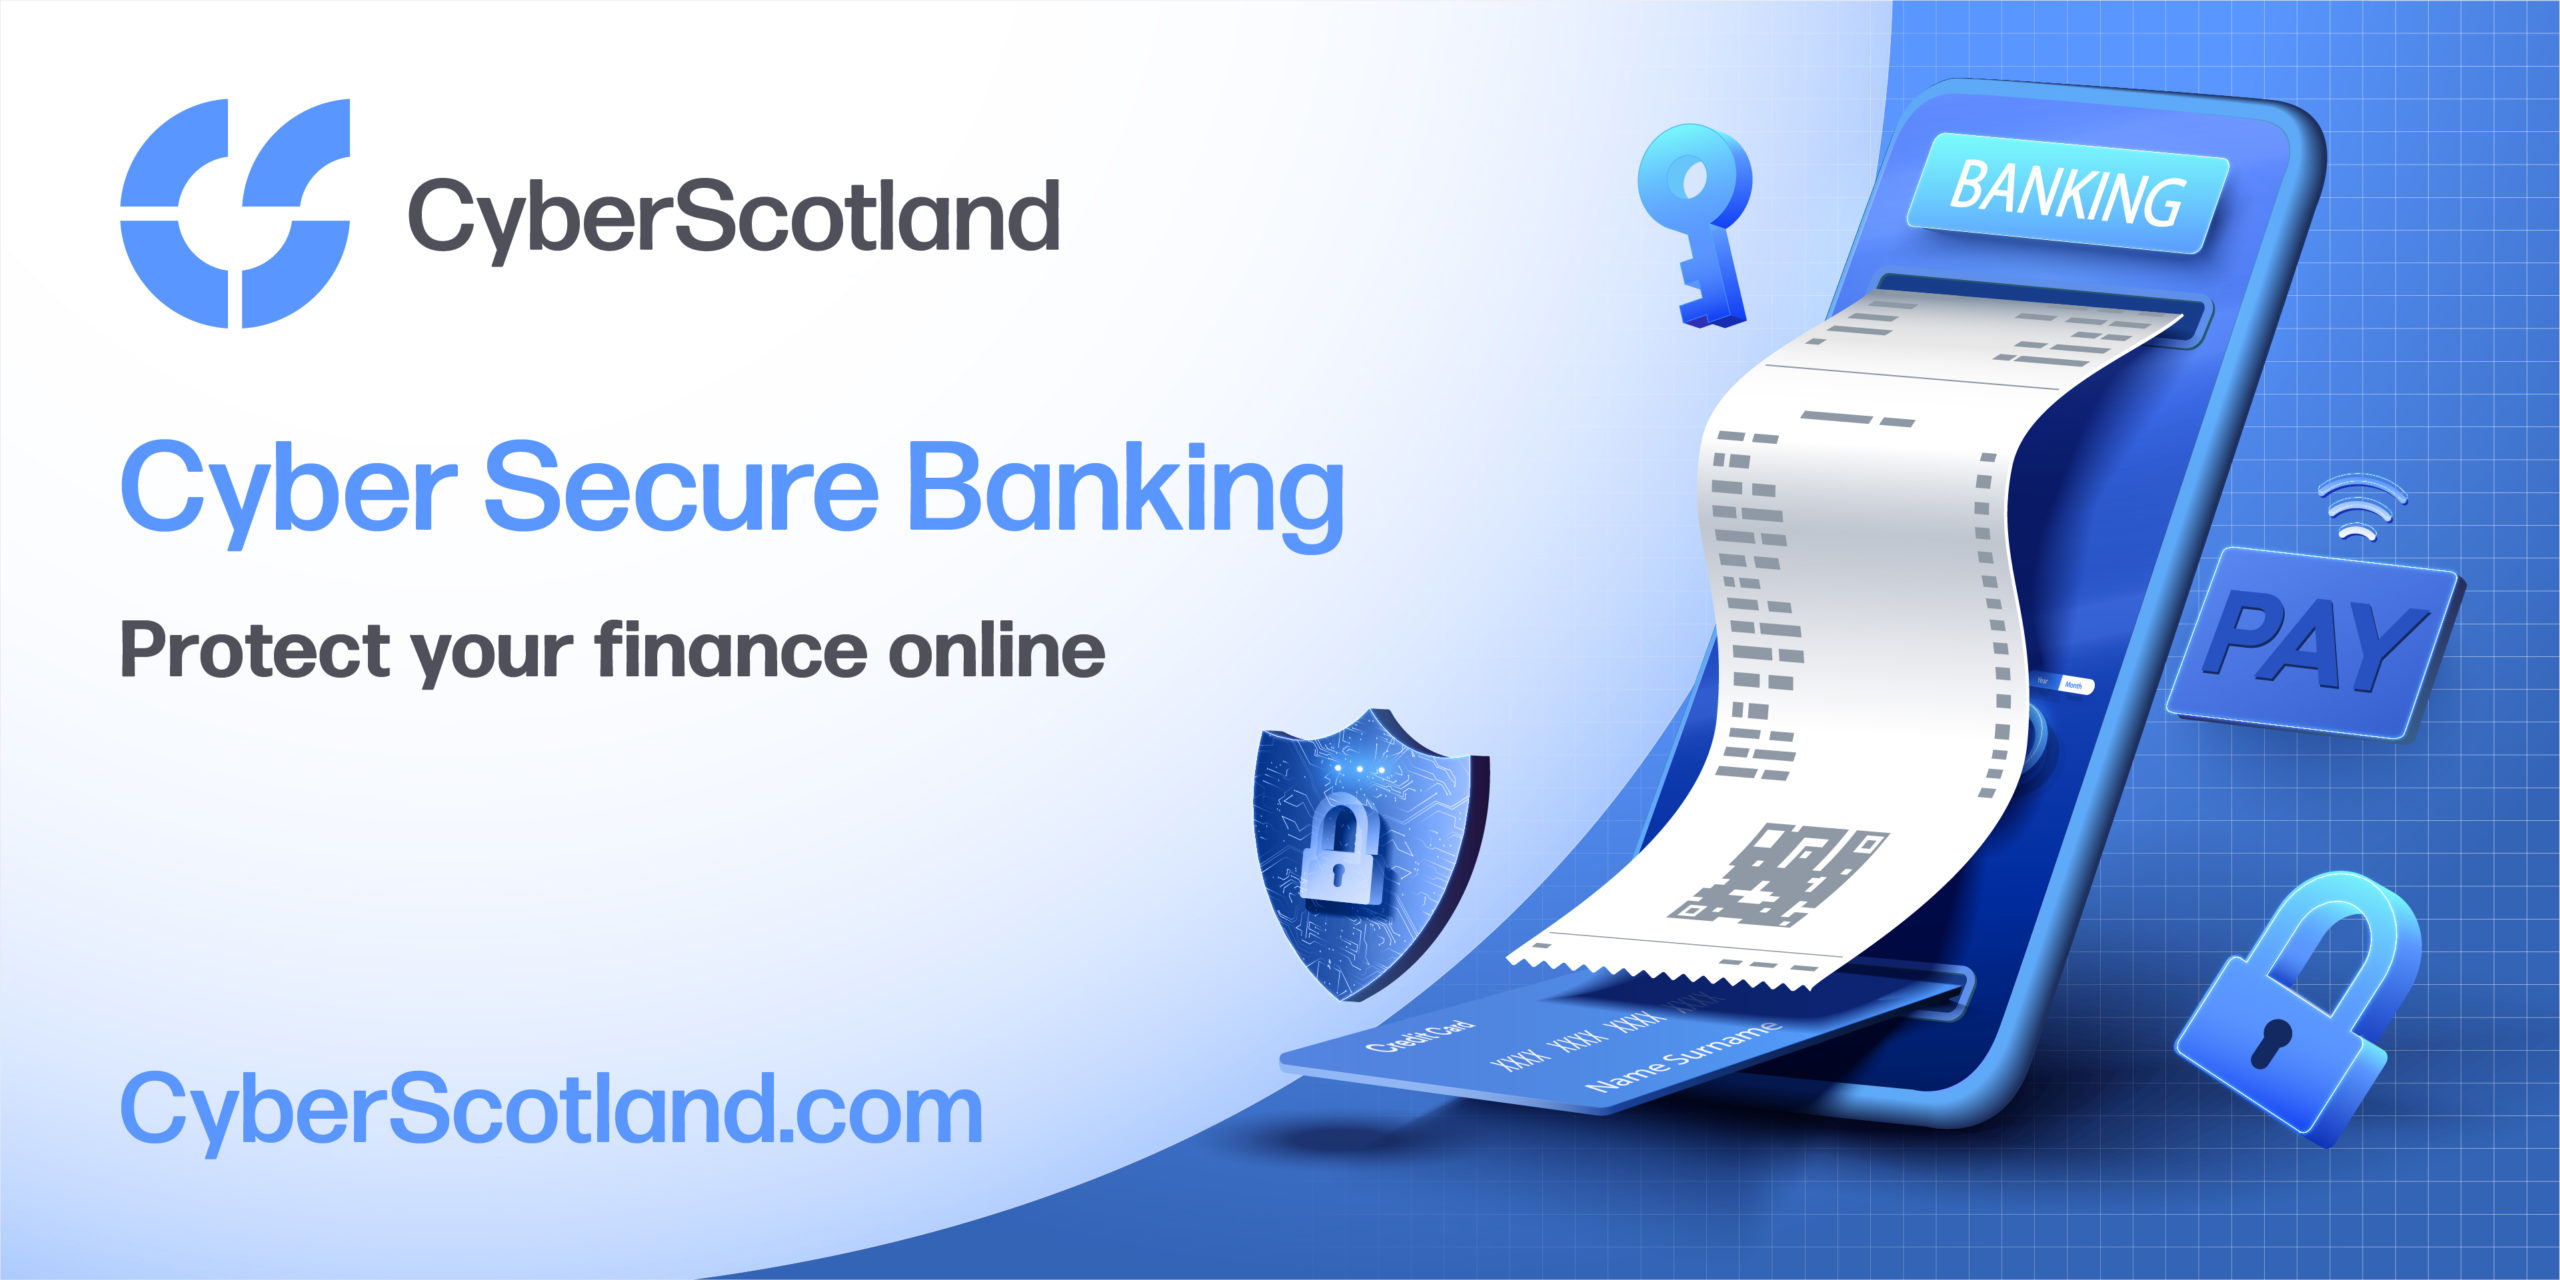 New Cyber Secure Banking campaign launched by CyberScotland Partnership